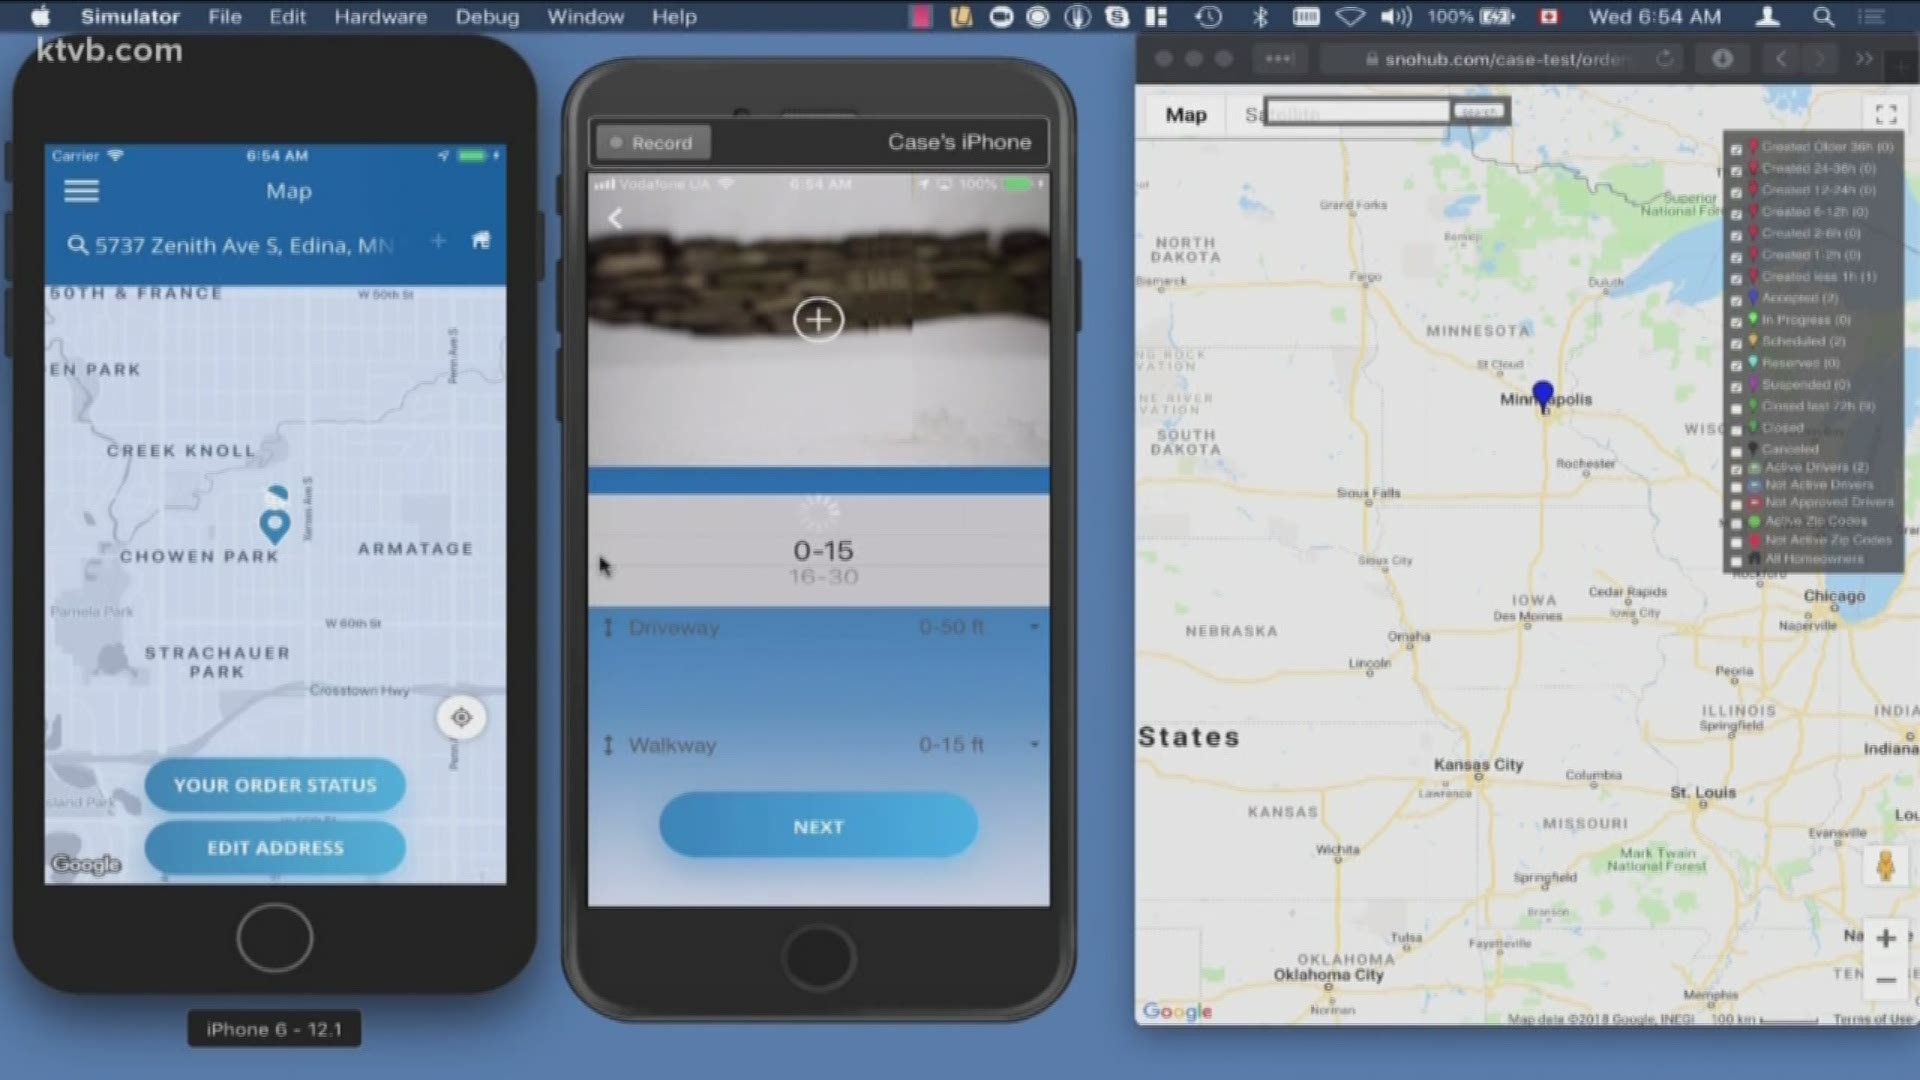 SnoHub lets consumers find someone to clear snow from around their home.